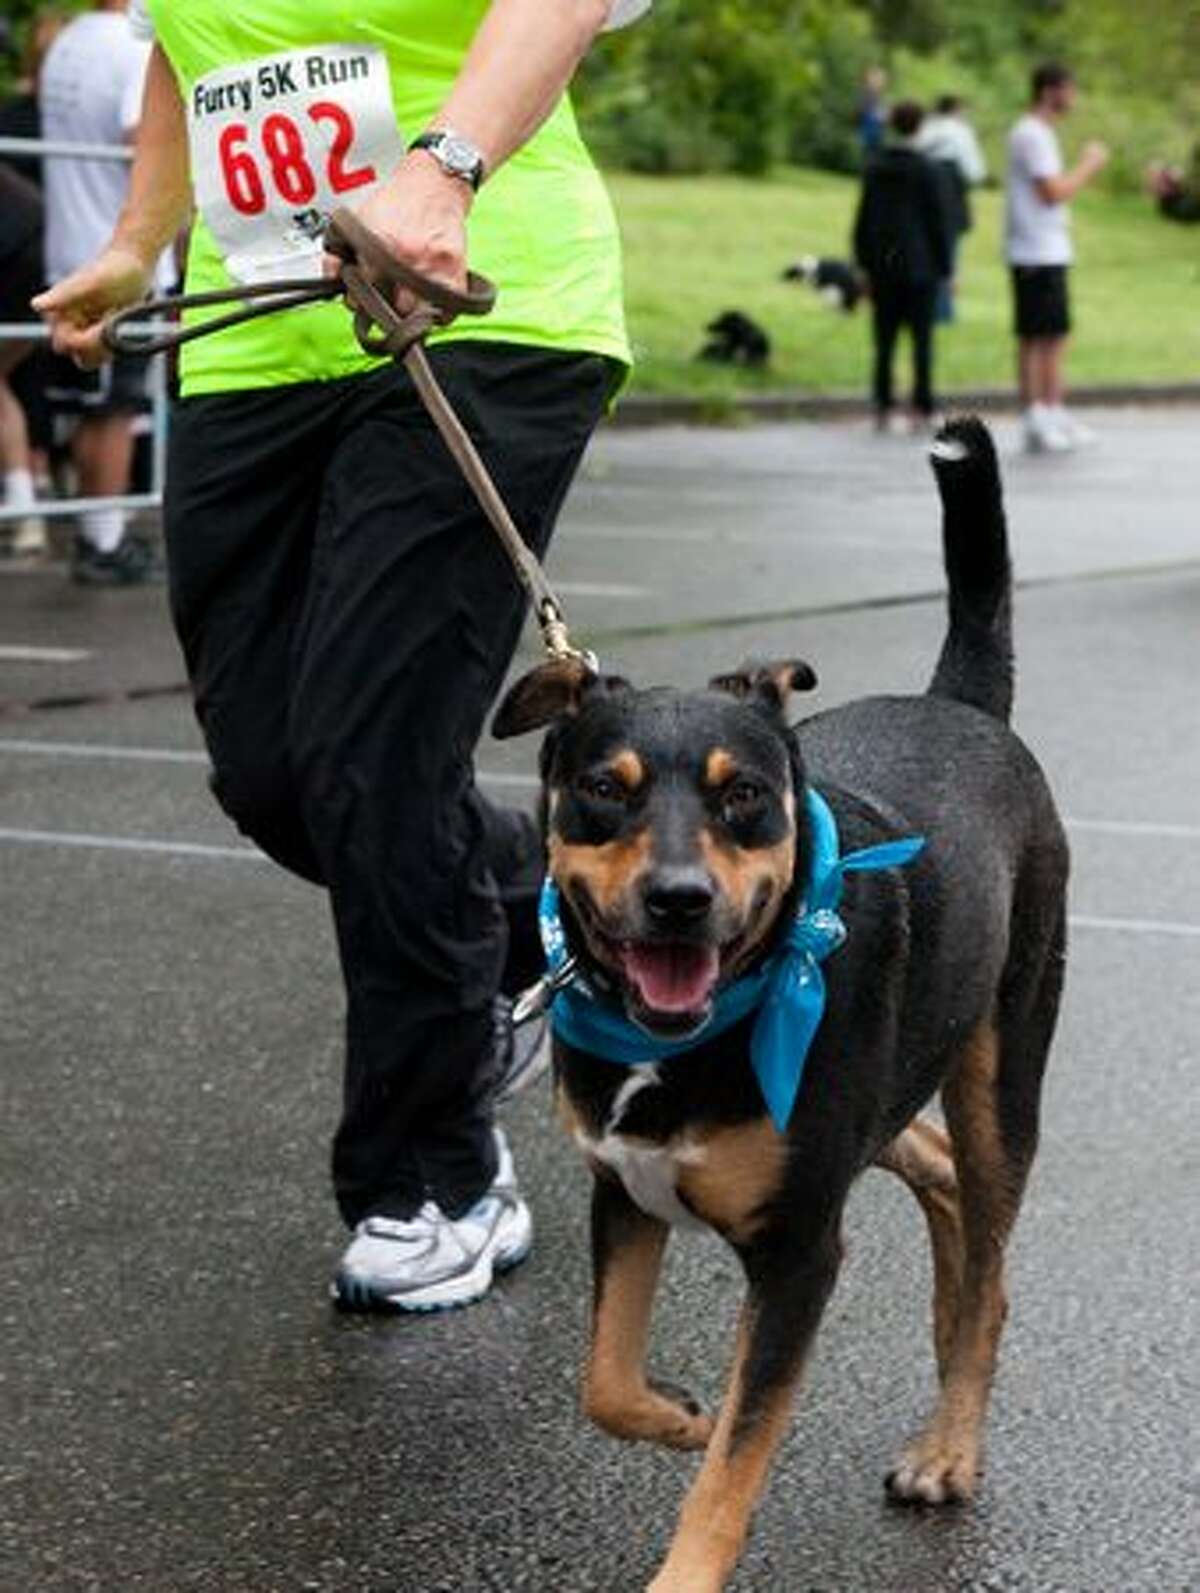 A dog smiles for the camera at the Furry 5K.